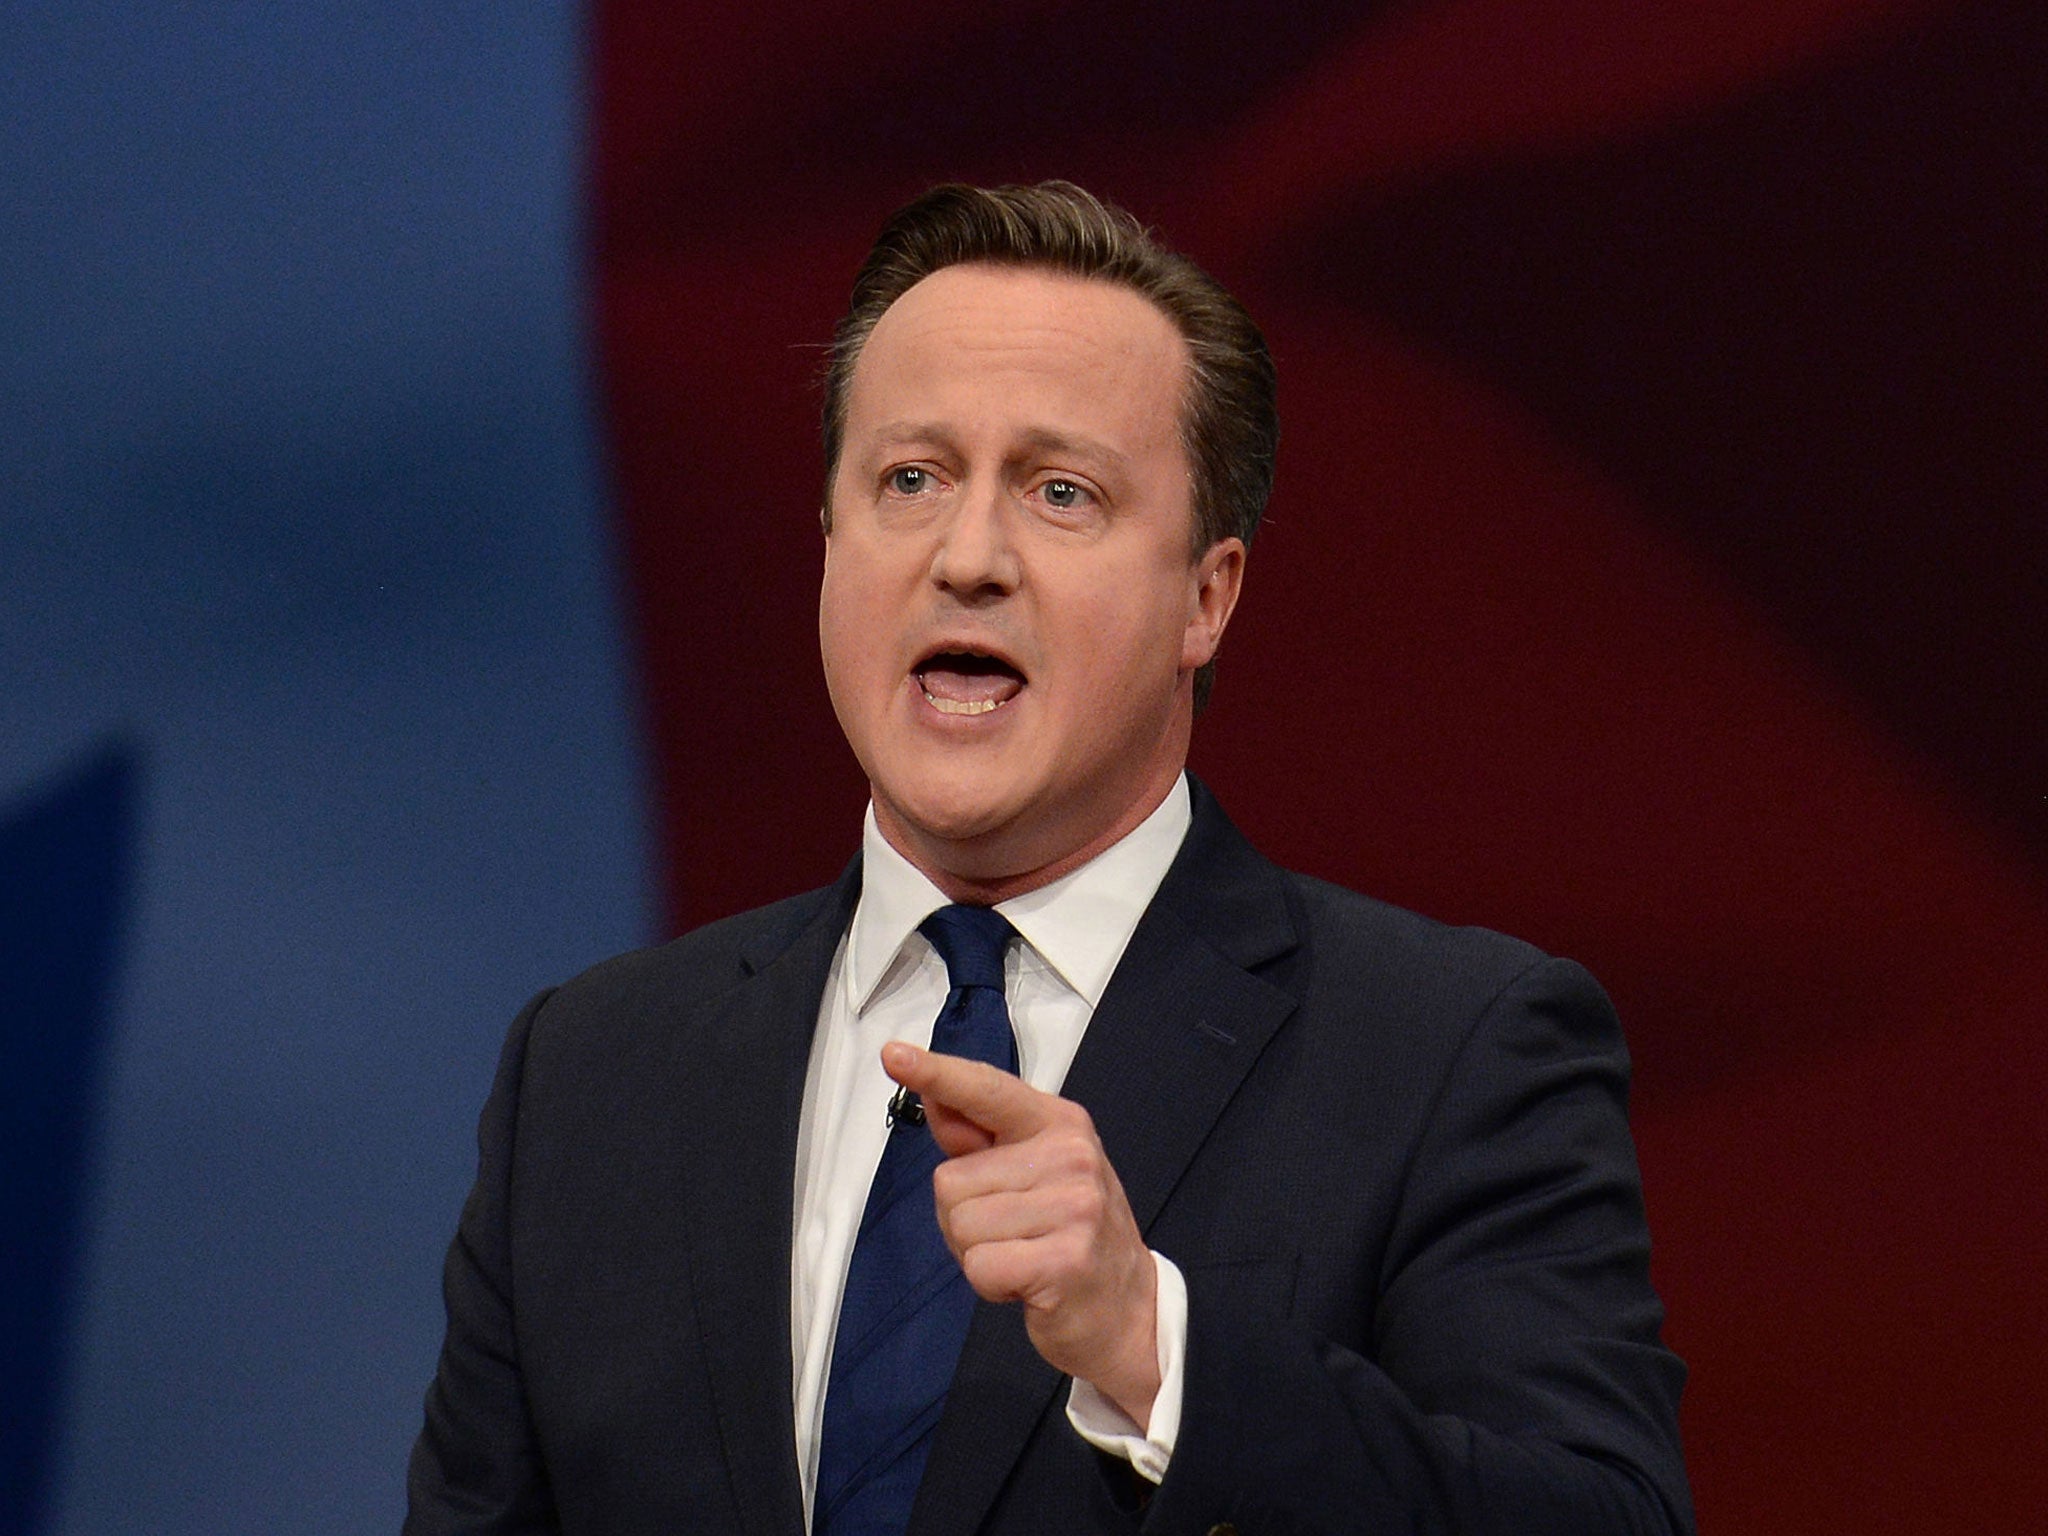 Mr Cameron warned his party not to tear itself apart ahead of the EU referendum